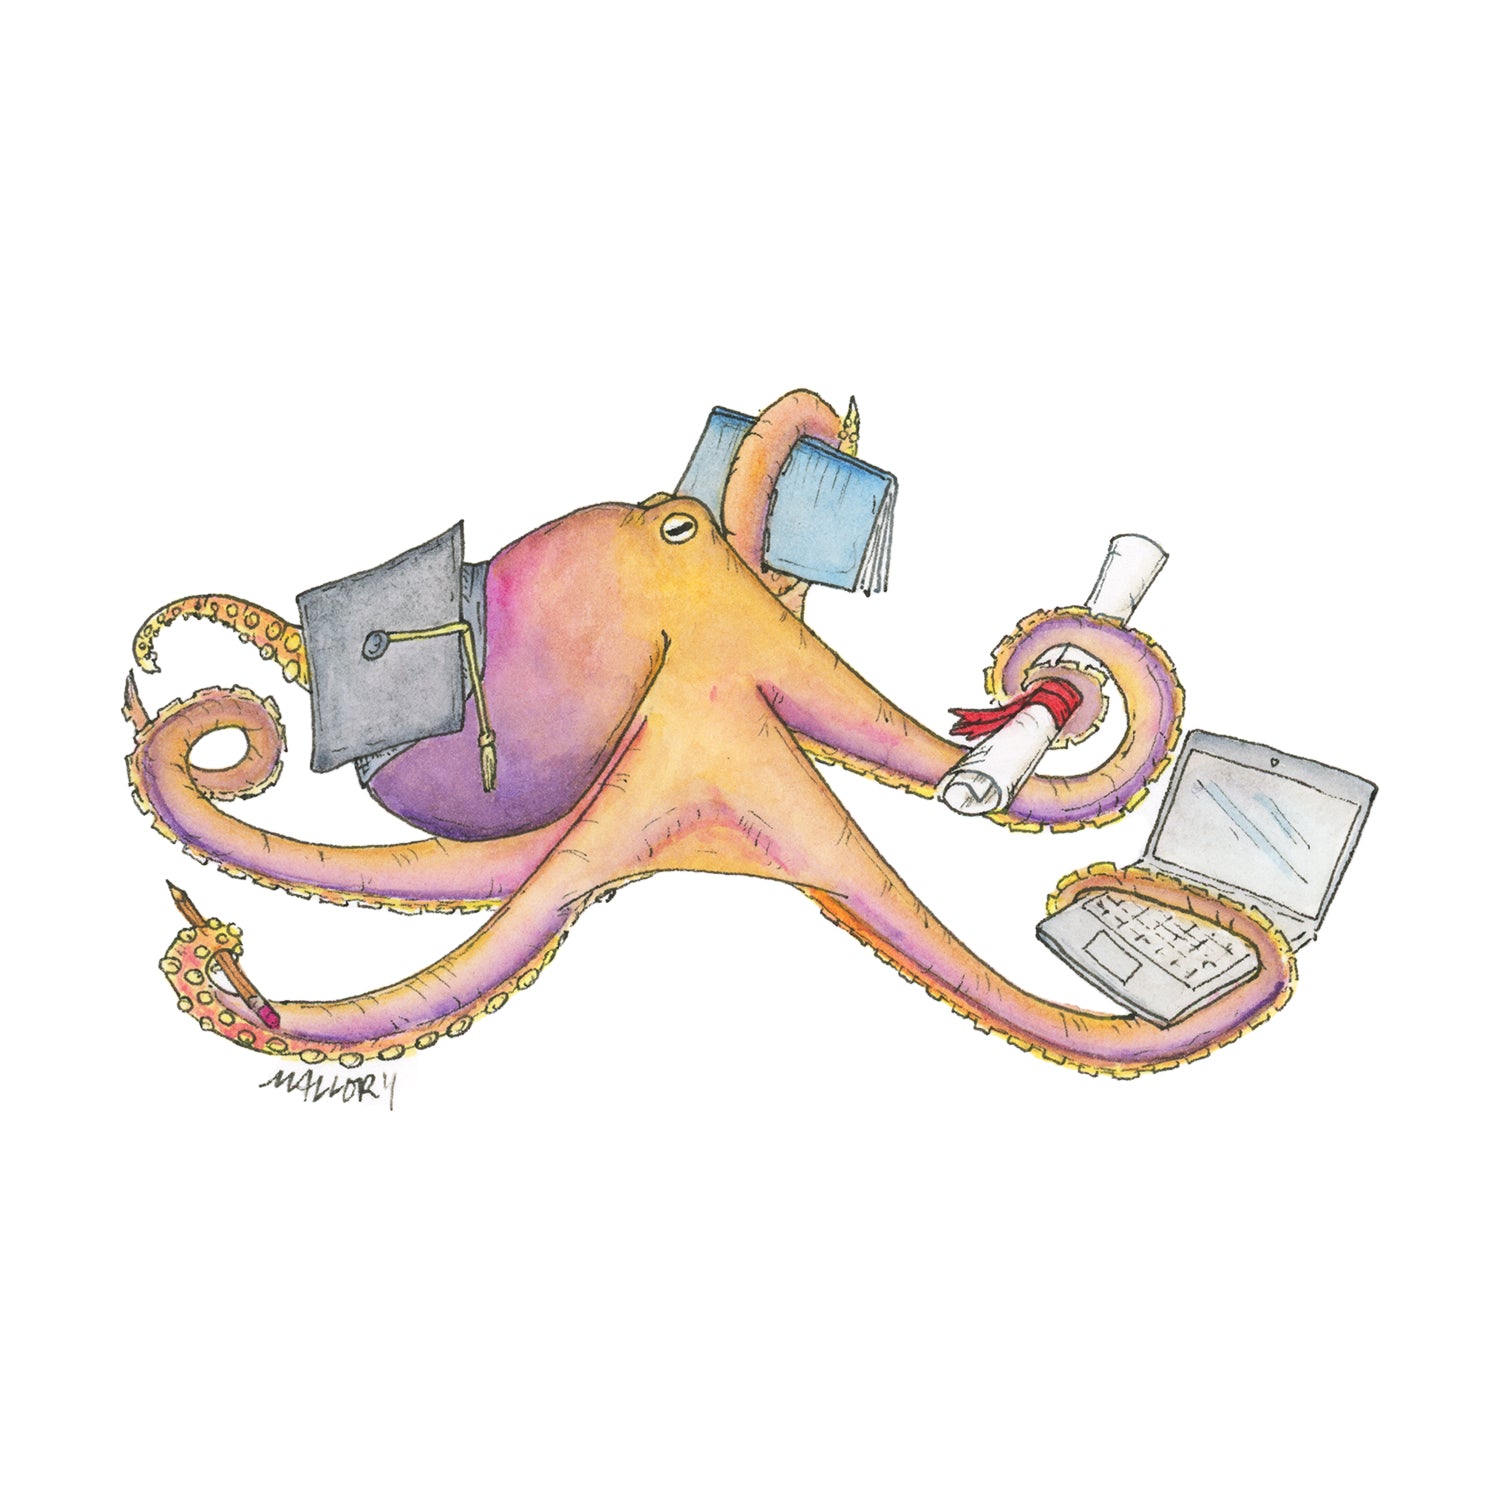 Image of an orange and purple octopus with a graduation cap. In it's tentacles, the octopus holds a graduation diploma, a computer, a notebook and pen. The image depicts a graduation card.